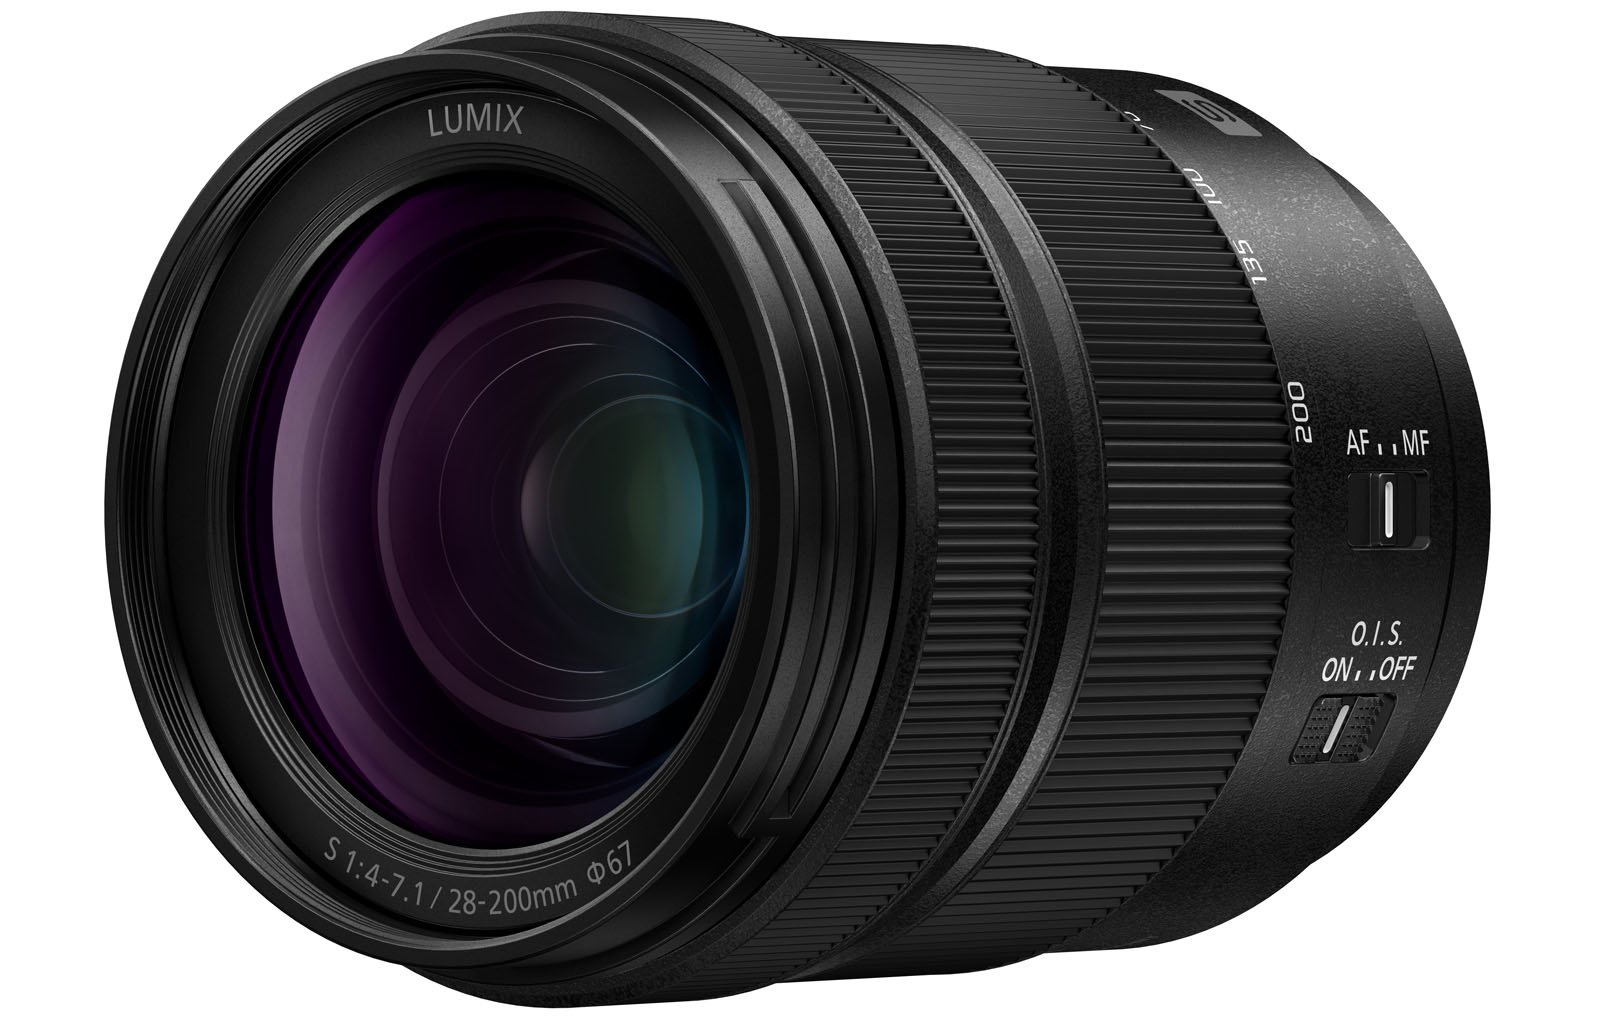 Panasonic Lumix S 28-200mm f/4-7.1 Macro O.I.S. all-in-one zoom lens for full-frame mirrorless L-Mount cameras